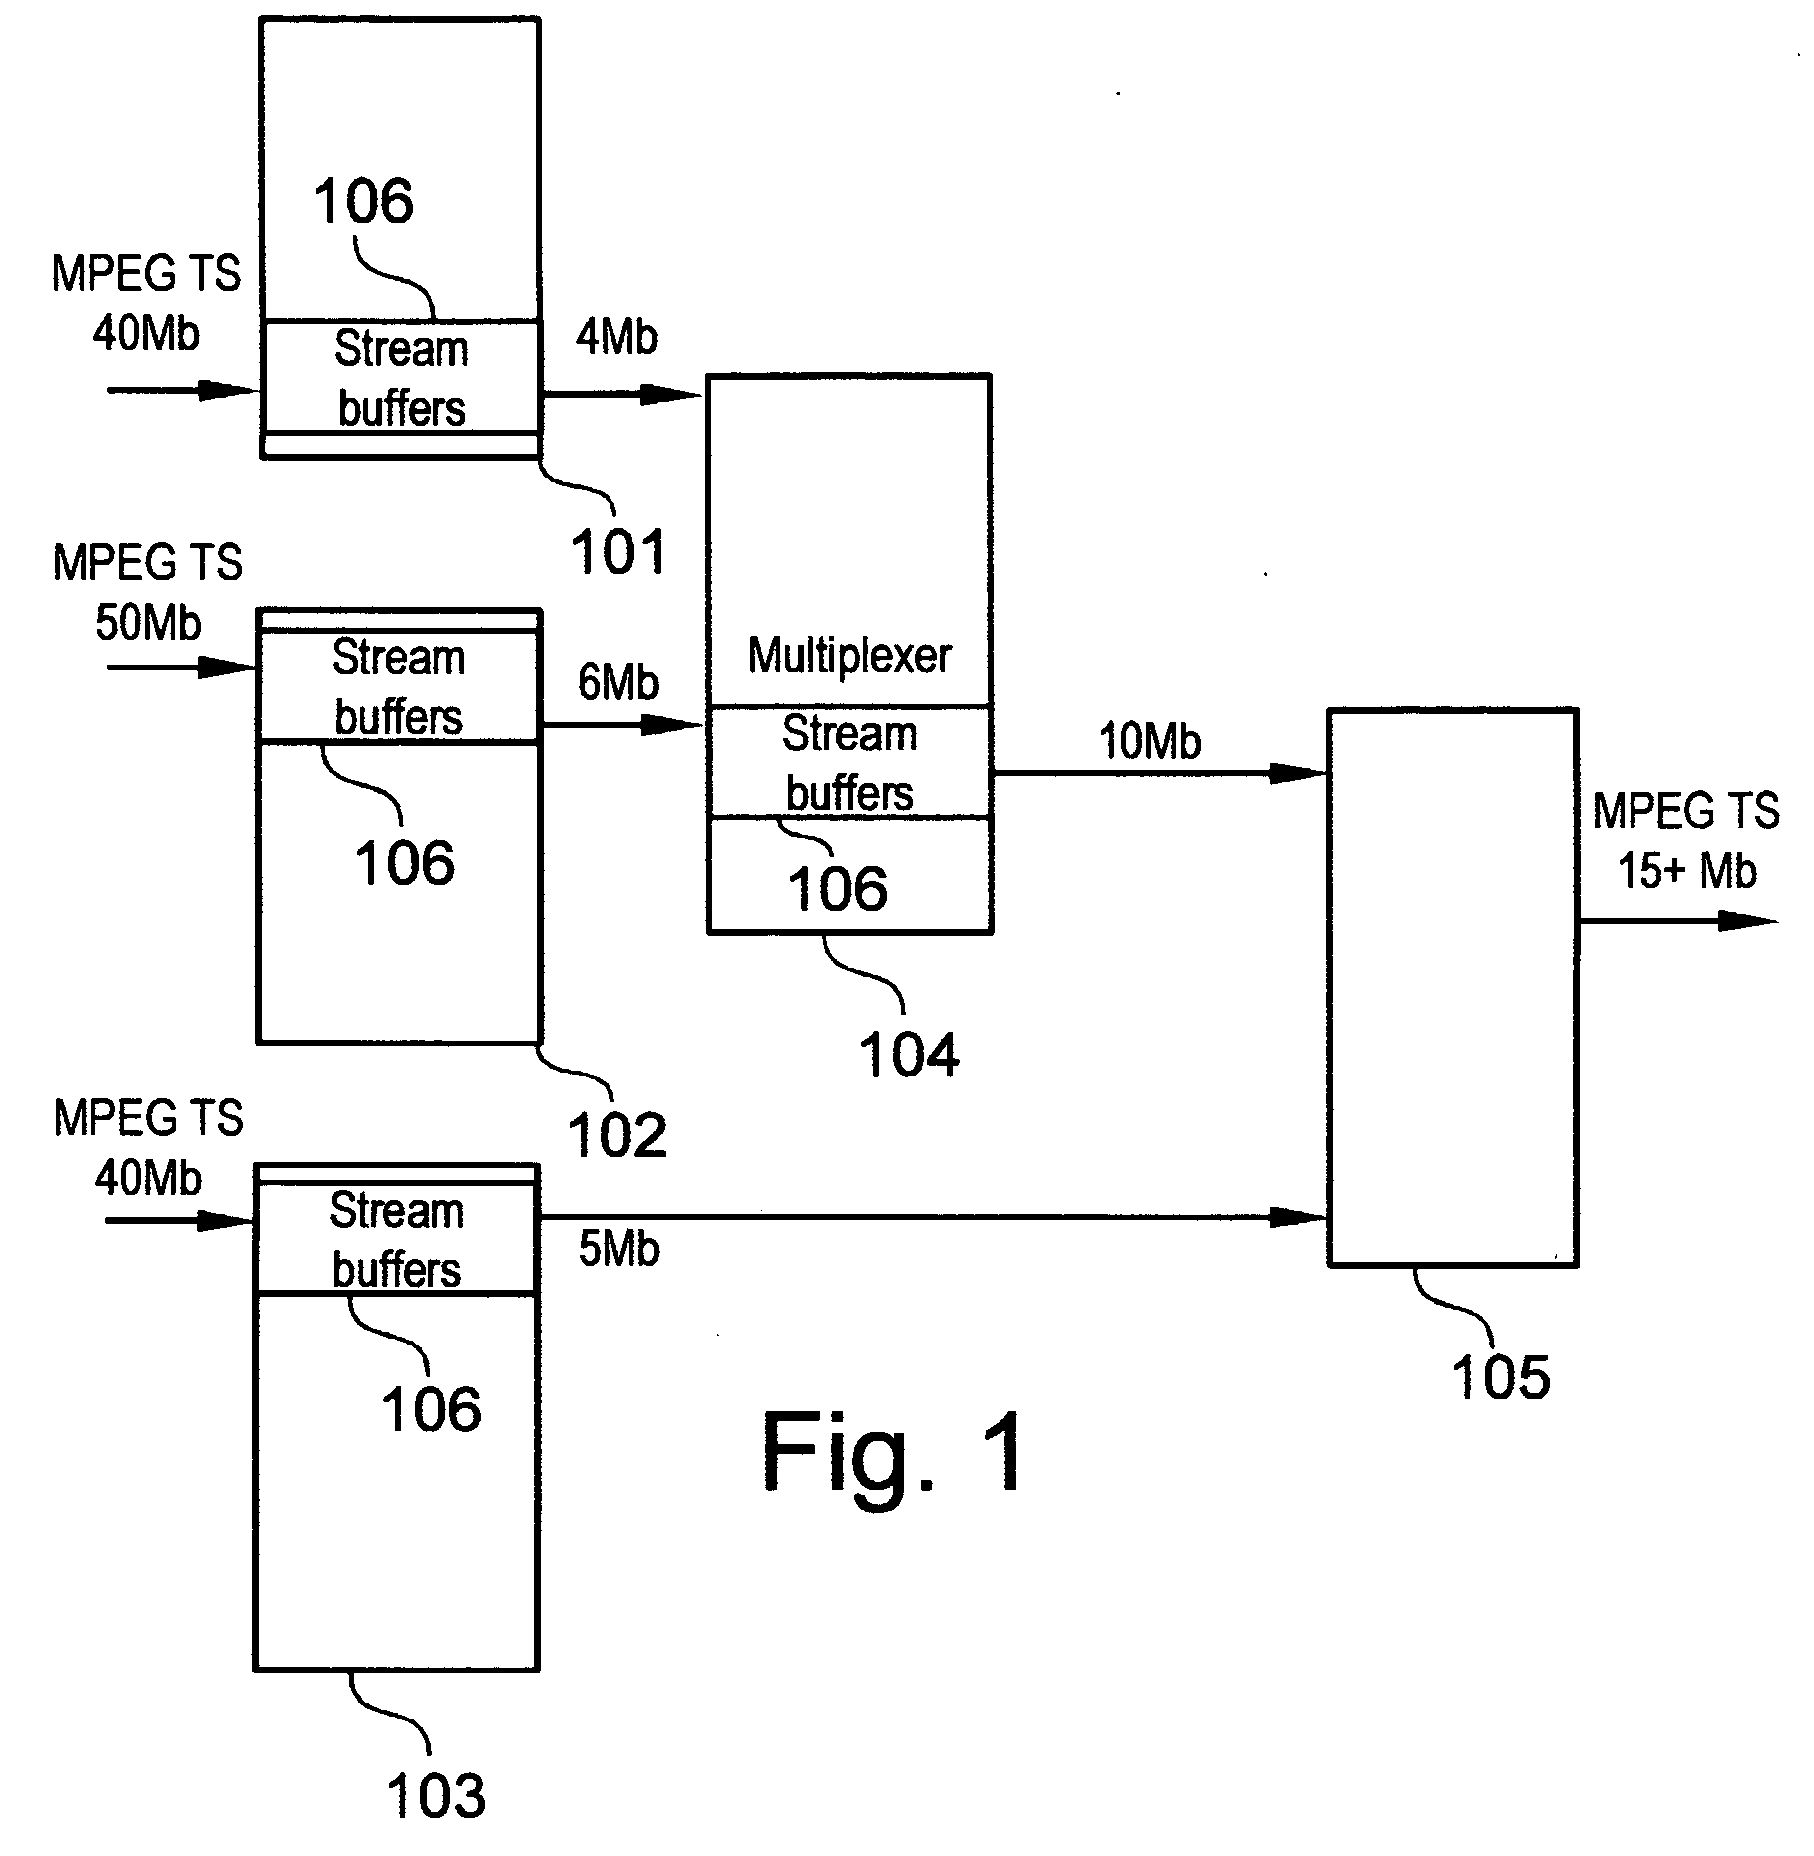 Method for multiplexing, in MPEG stream processor, packets of several input MPEG streams into one output transport stream with simultaneous correction of time stamps